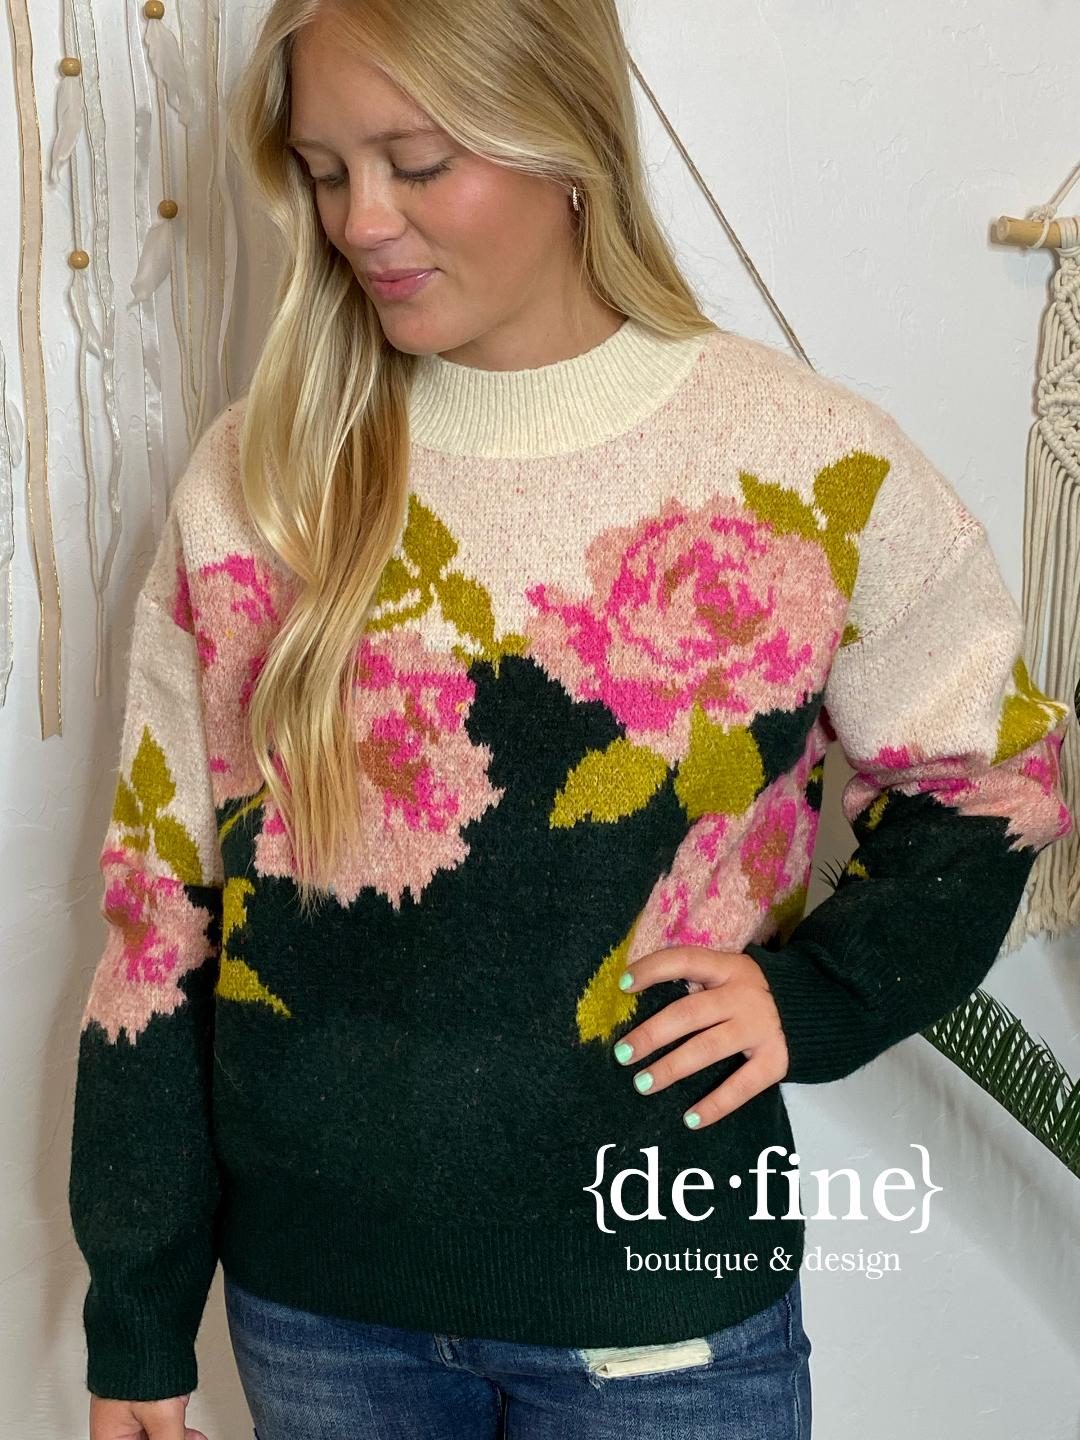 Hunter Green and Cream Sweater with Large Pink Roses